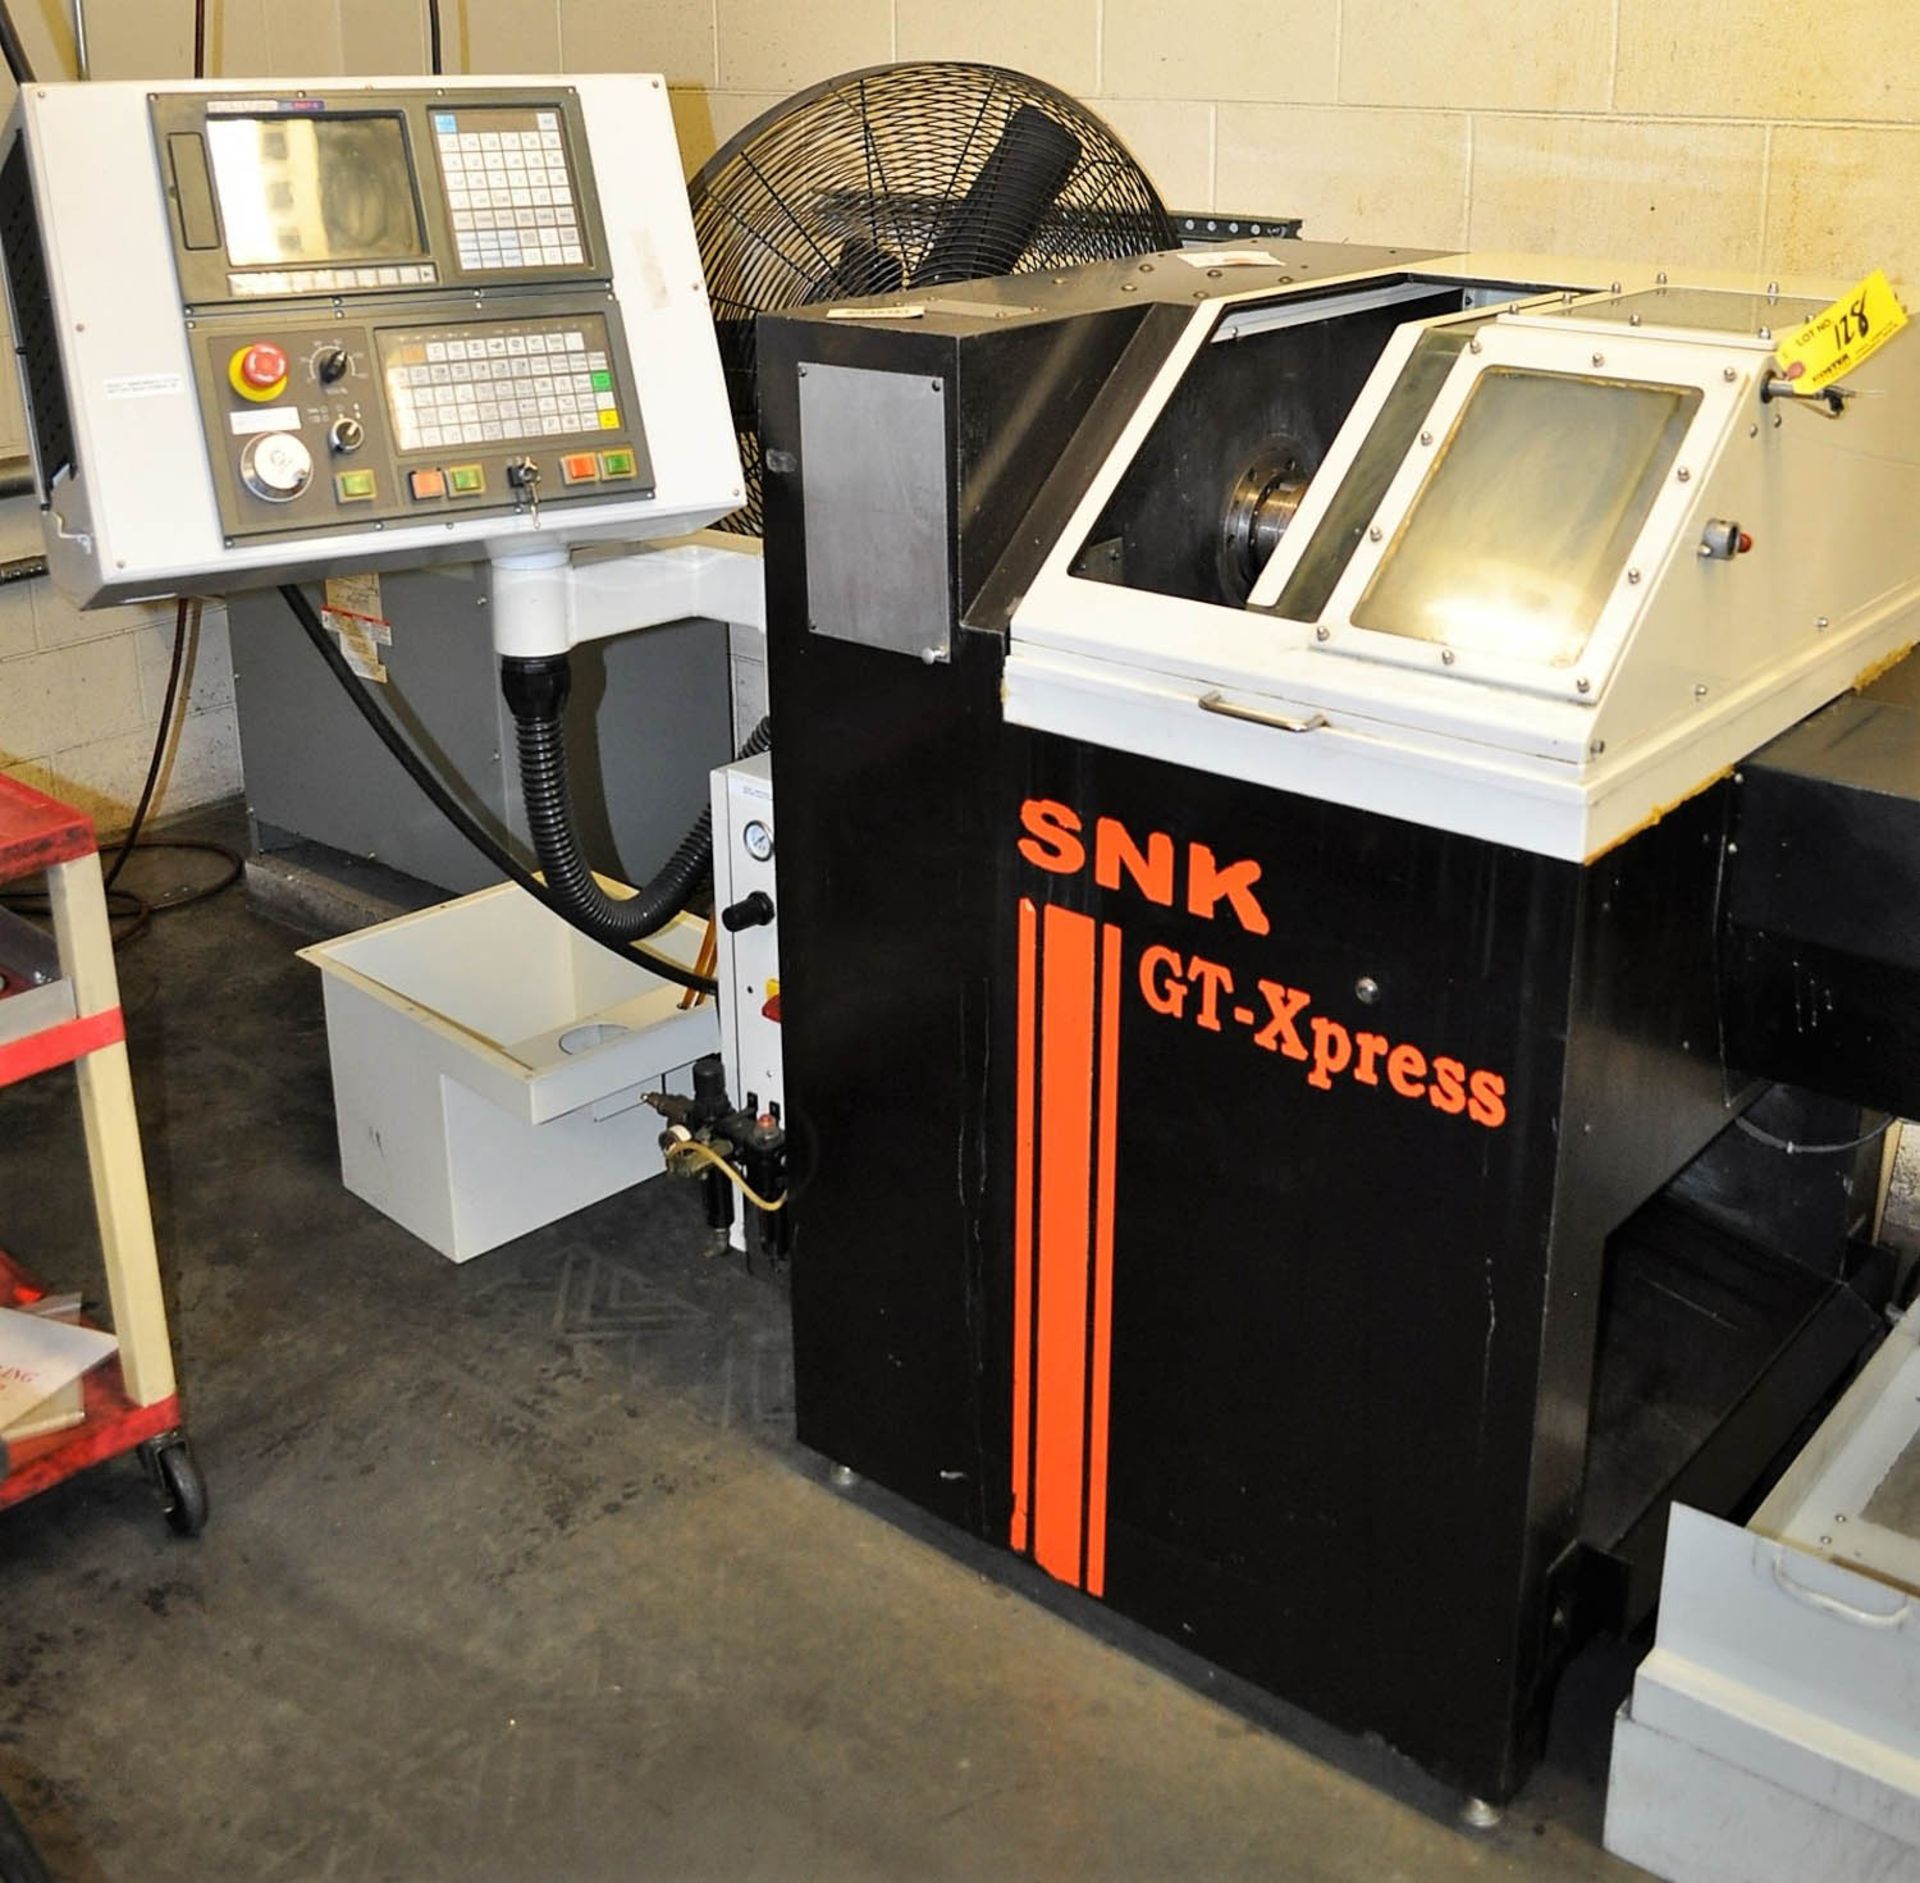 SNK MDL GT EXPRESS 2-AXIS CNC LATHE, WITH GSKP88T-H CNC CONTROL, COOLANT, S/N: JB15-4069-S (2004) [